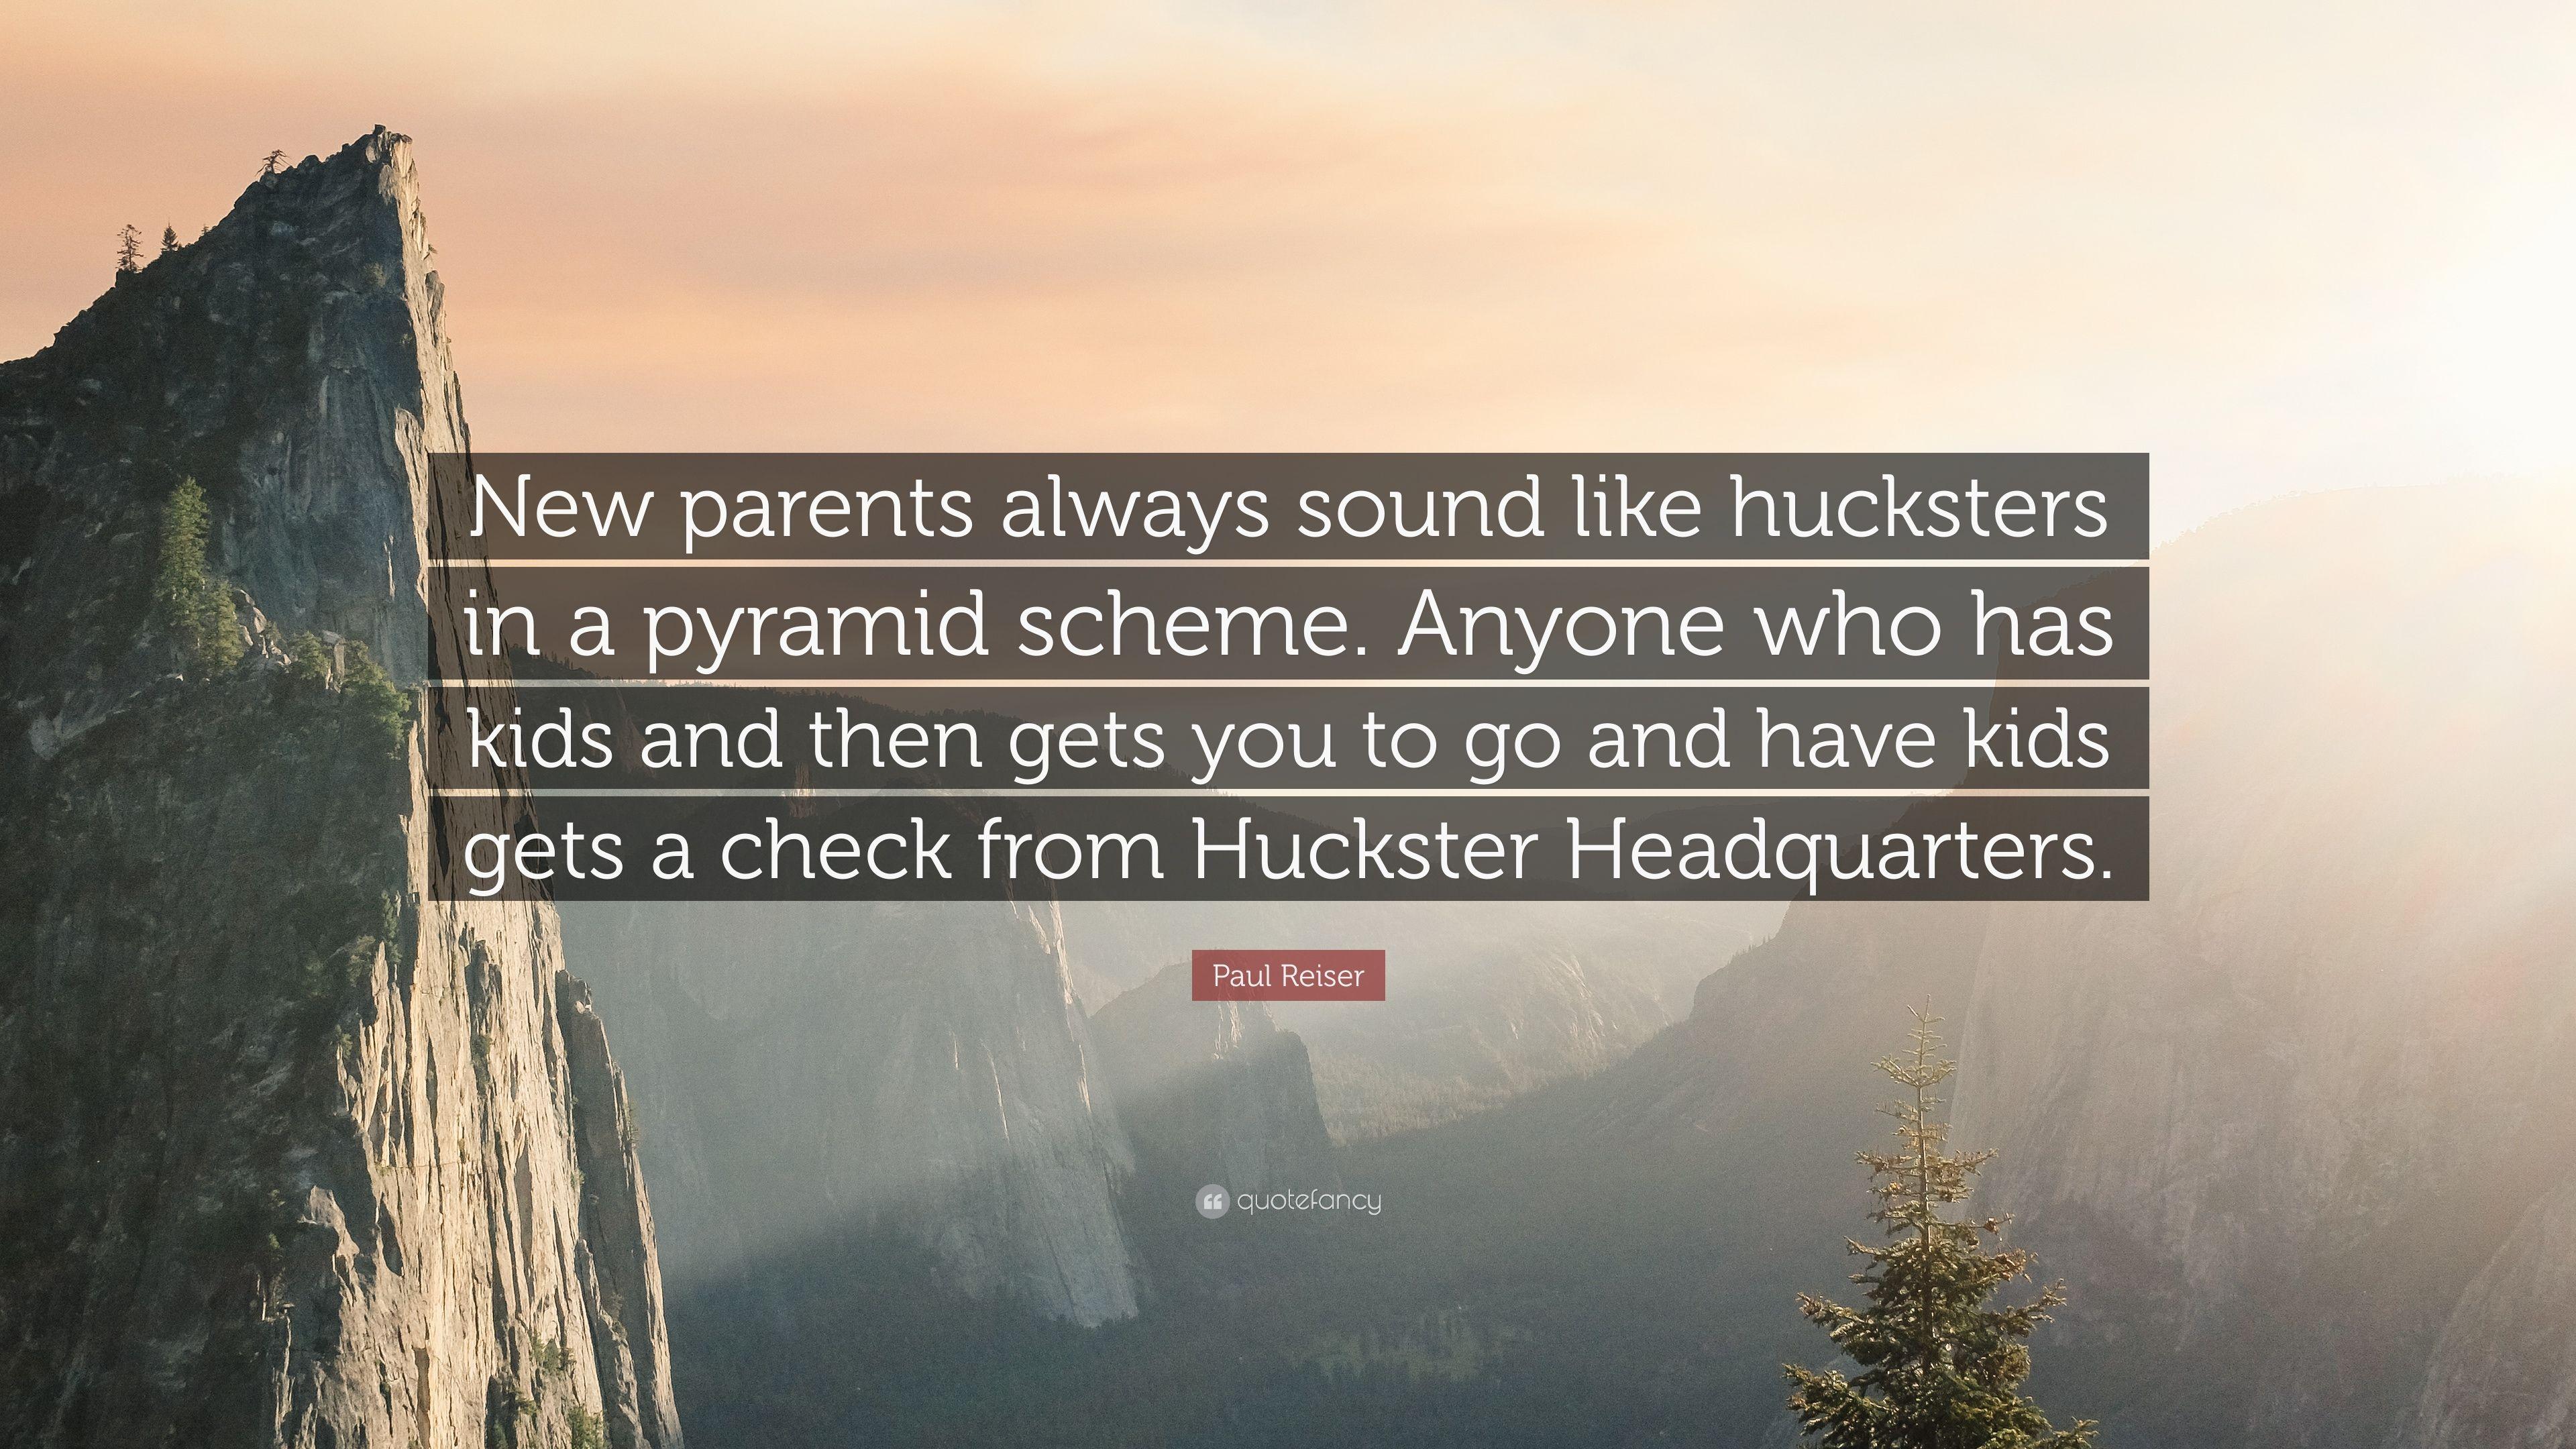 Paul Reiser Quote: “New parents always sound like hucksters in a